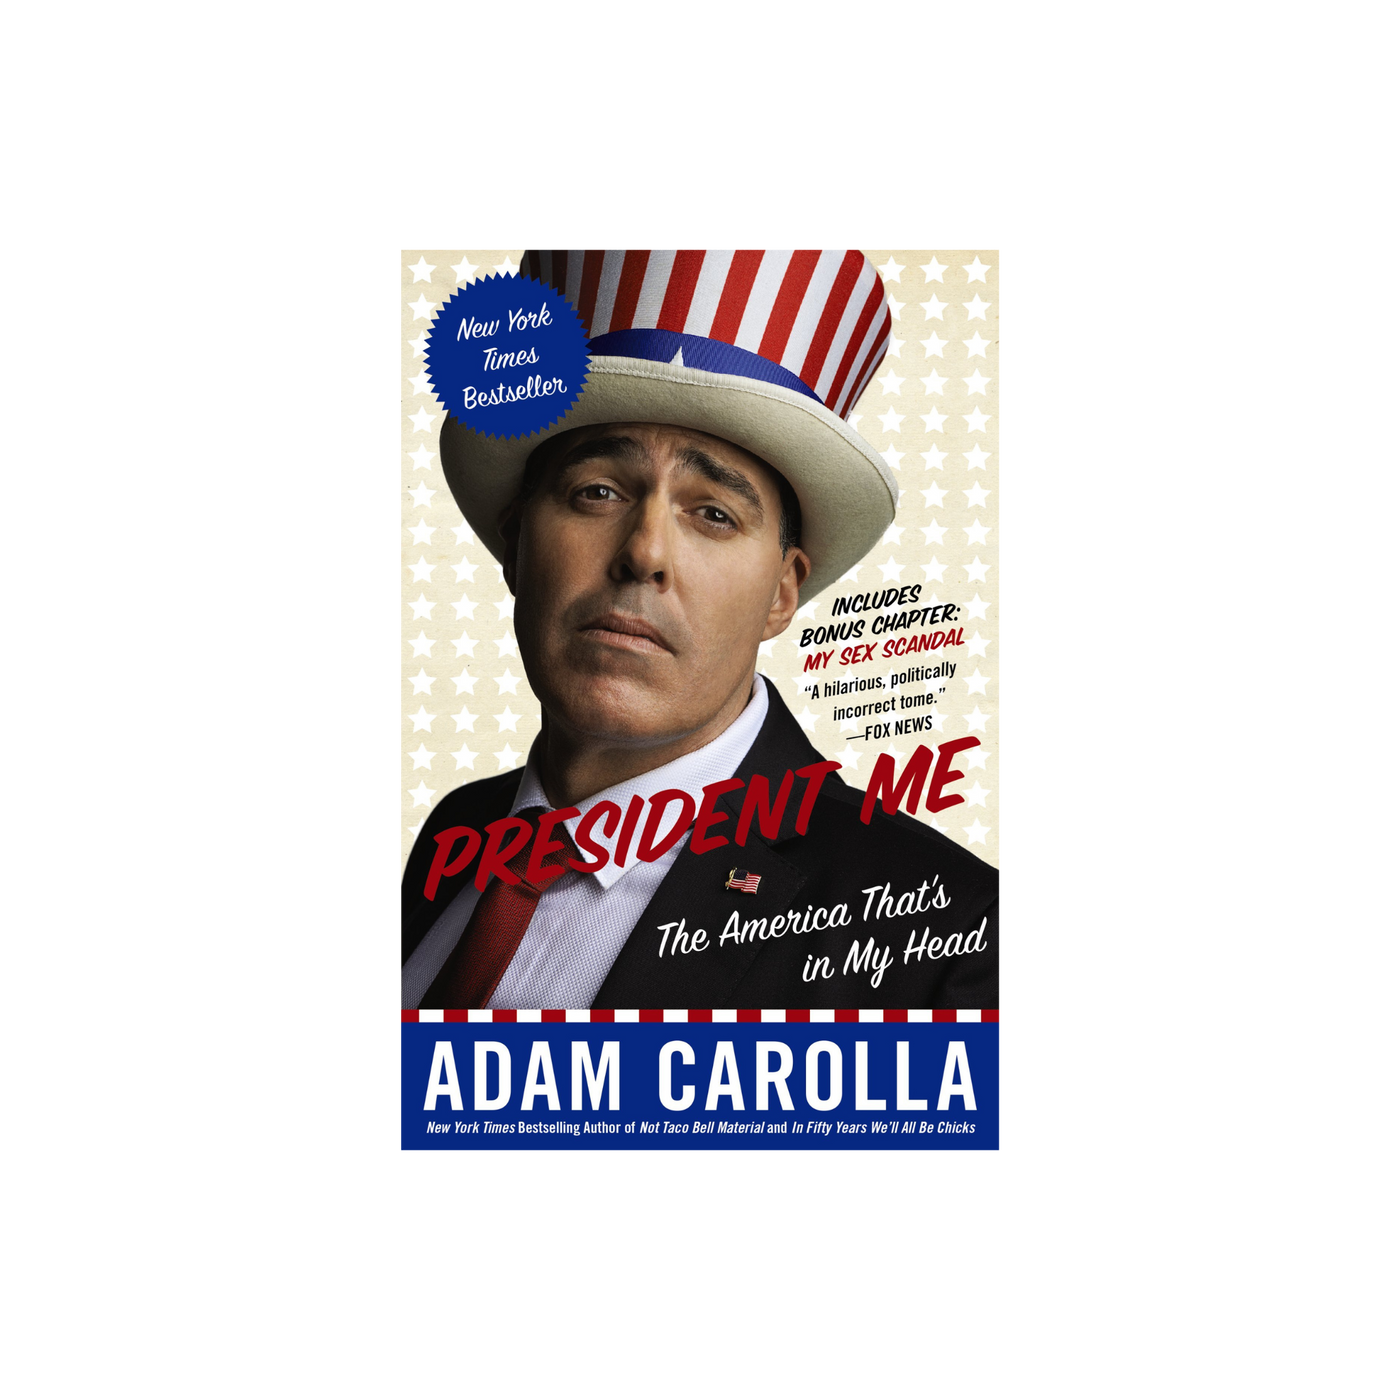 President Me: The America That's In My Head by Adam Carolla